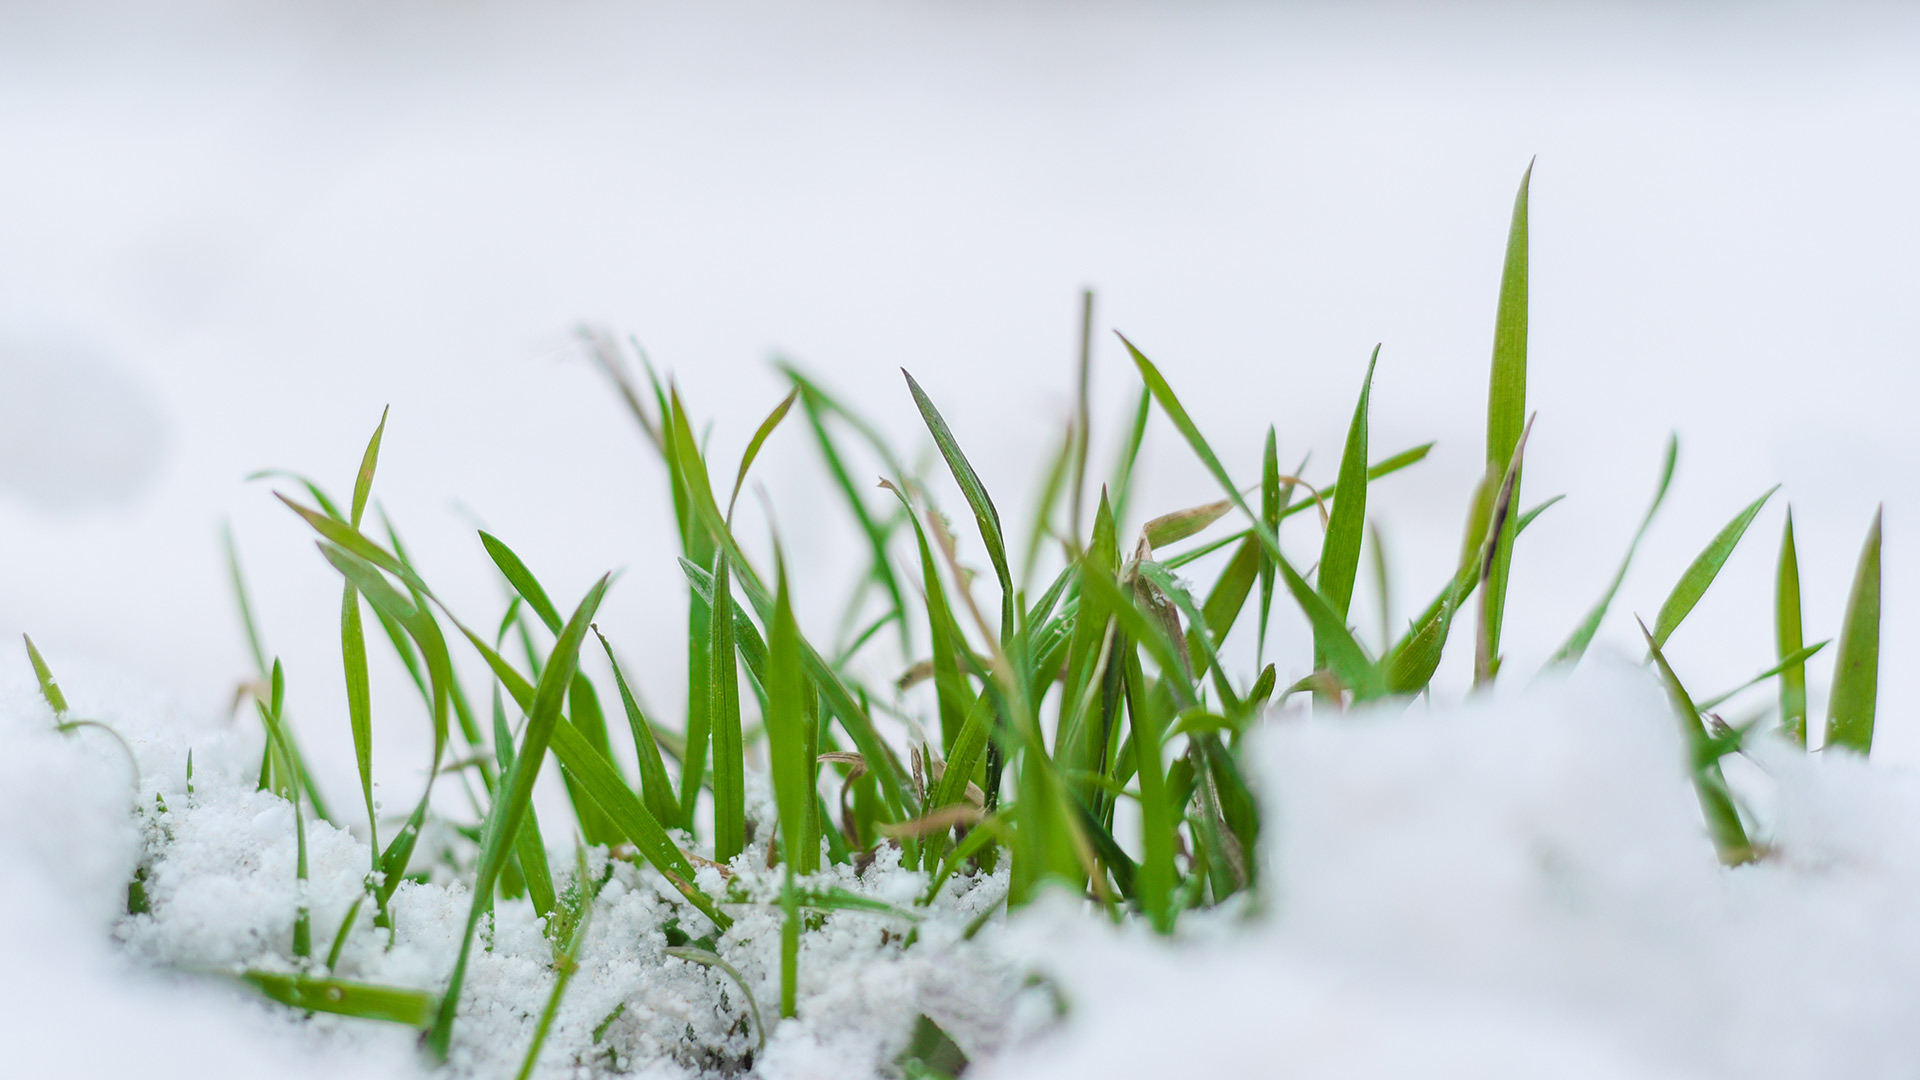 Snow Mold 101 - Everything You Need to Know About This Lawn Disease